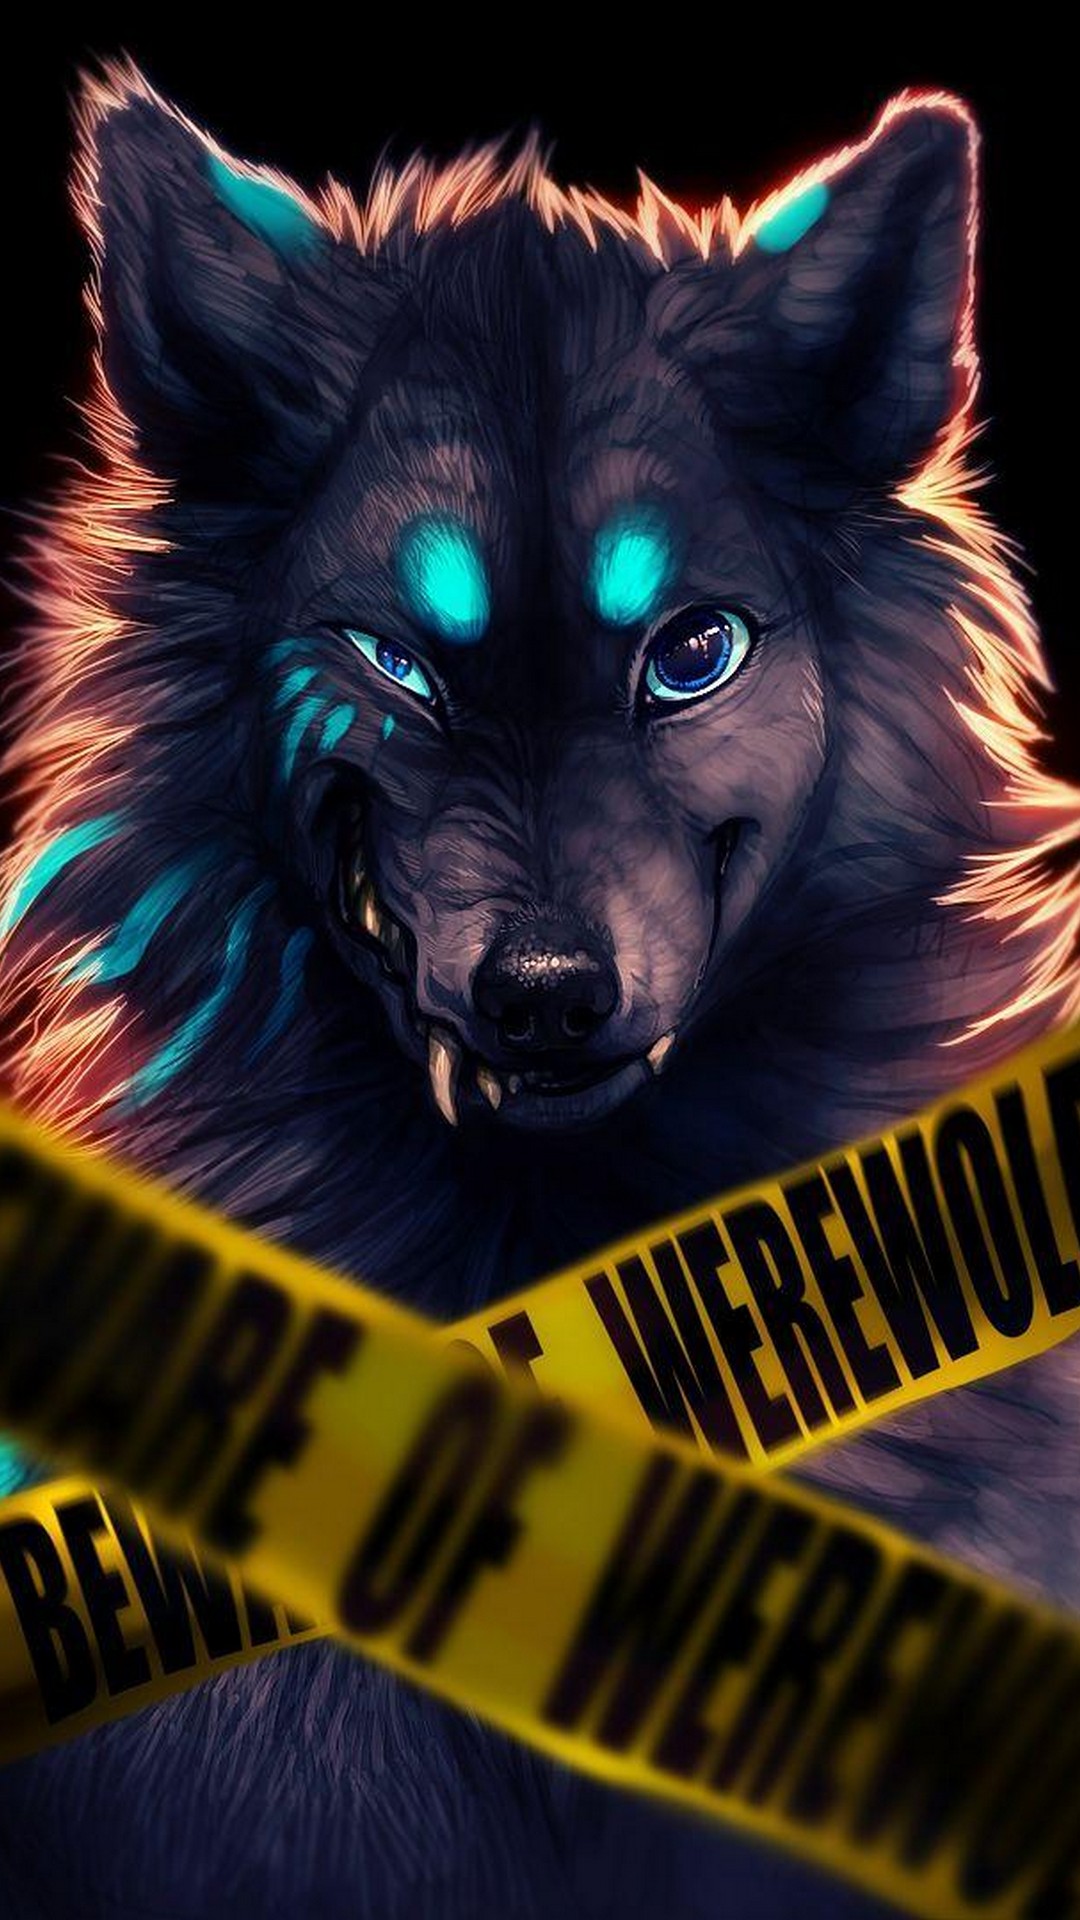 Cool Wolf Phone Wallpaper With High Resolution Pixel Cool Wolf Wallpapers For Phone 2841780 Hd Wallpaper Backgrounds Download We present here new selected hd wallpapers with high quality and widescreen. cool wolf phone wallpaper with high